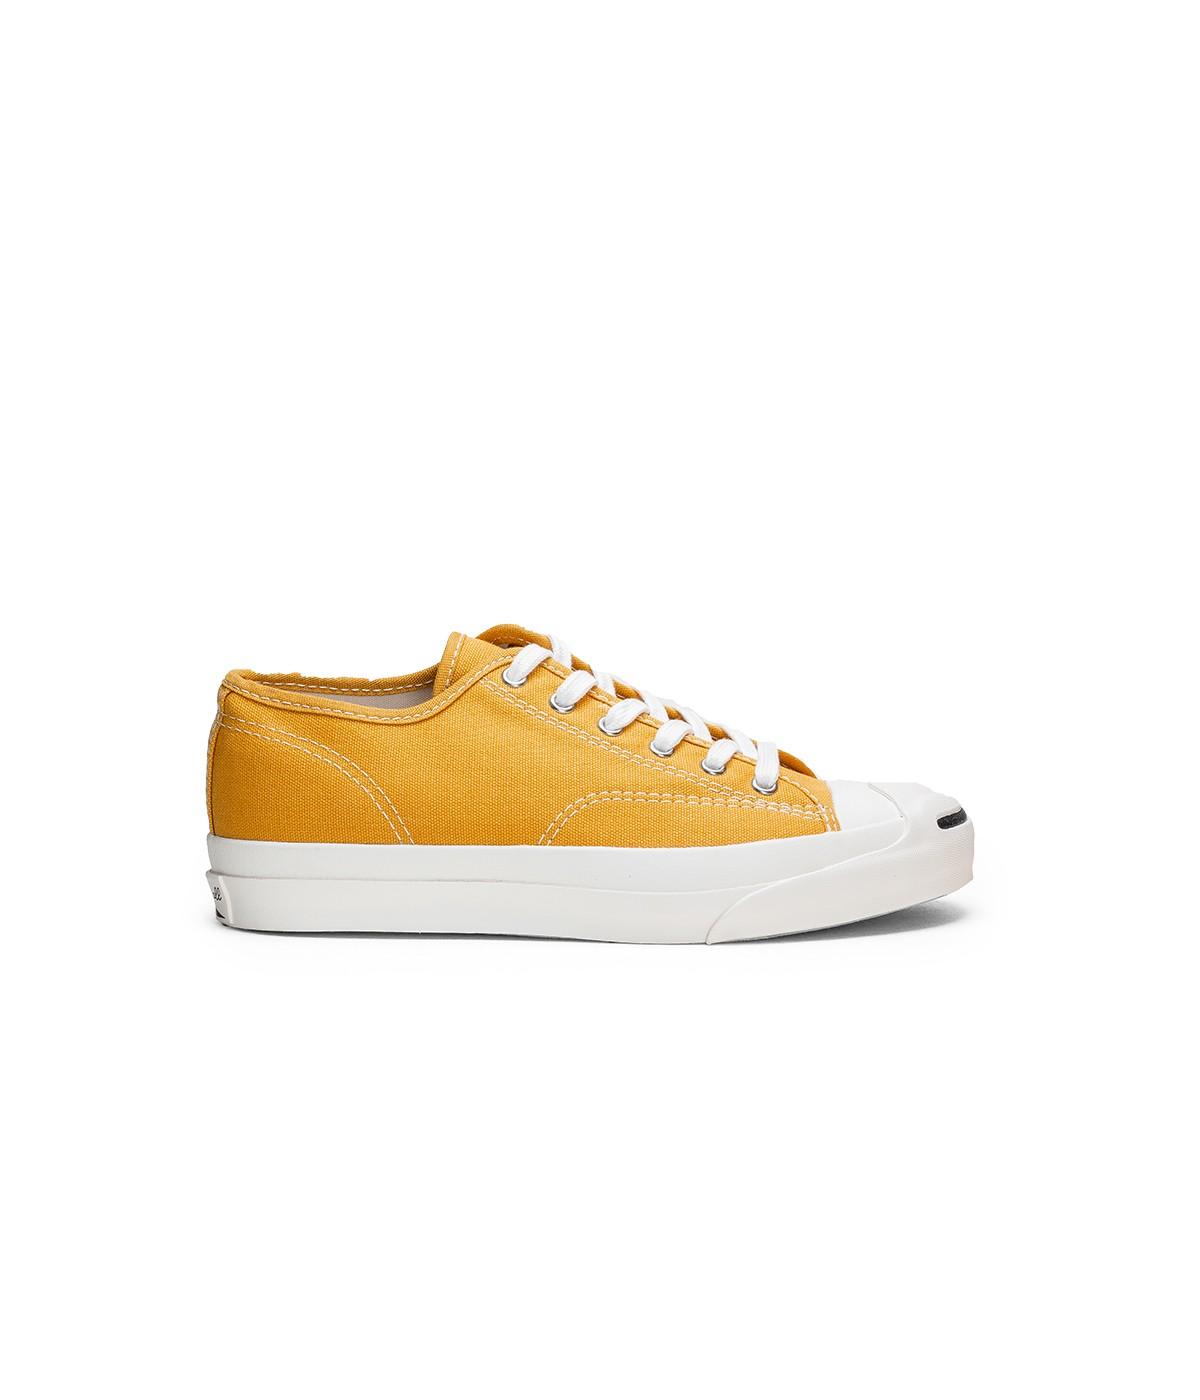 converse jack purcell mustard